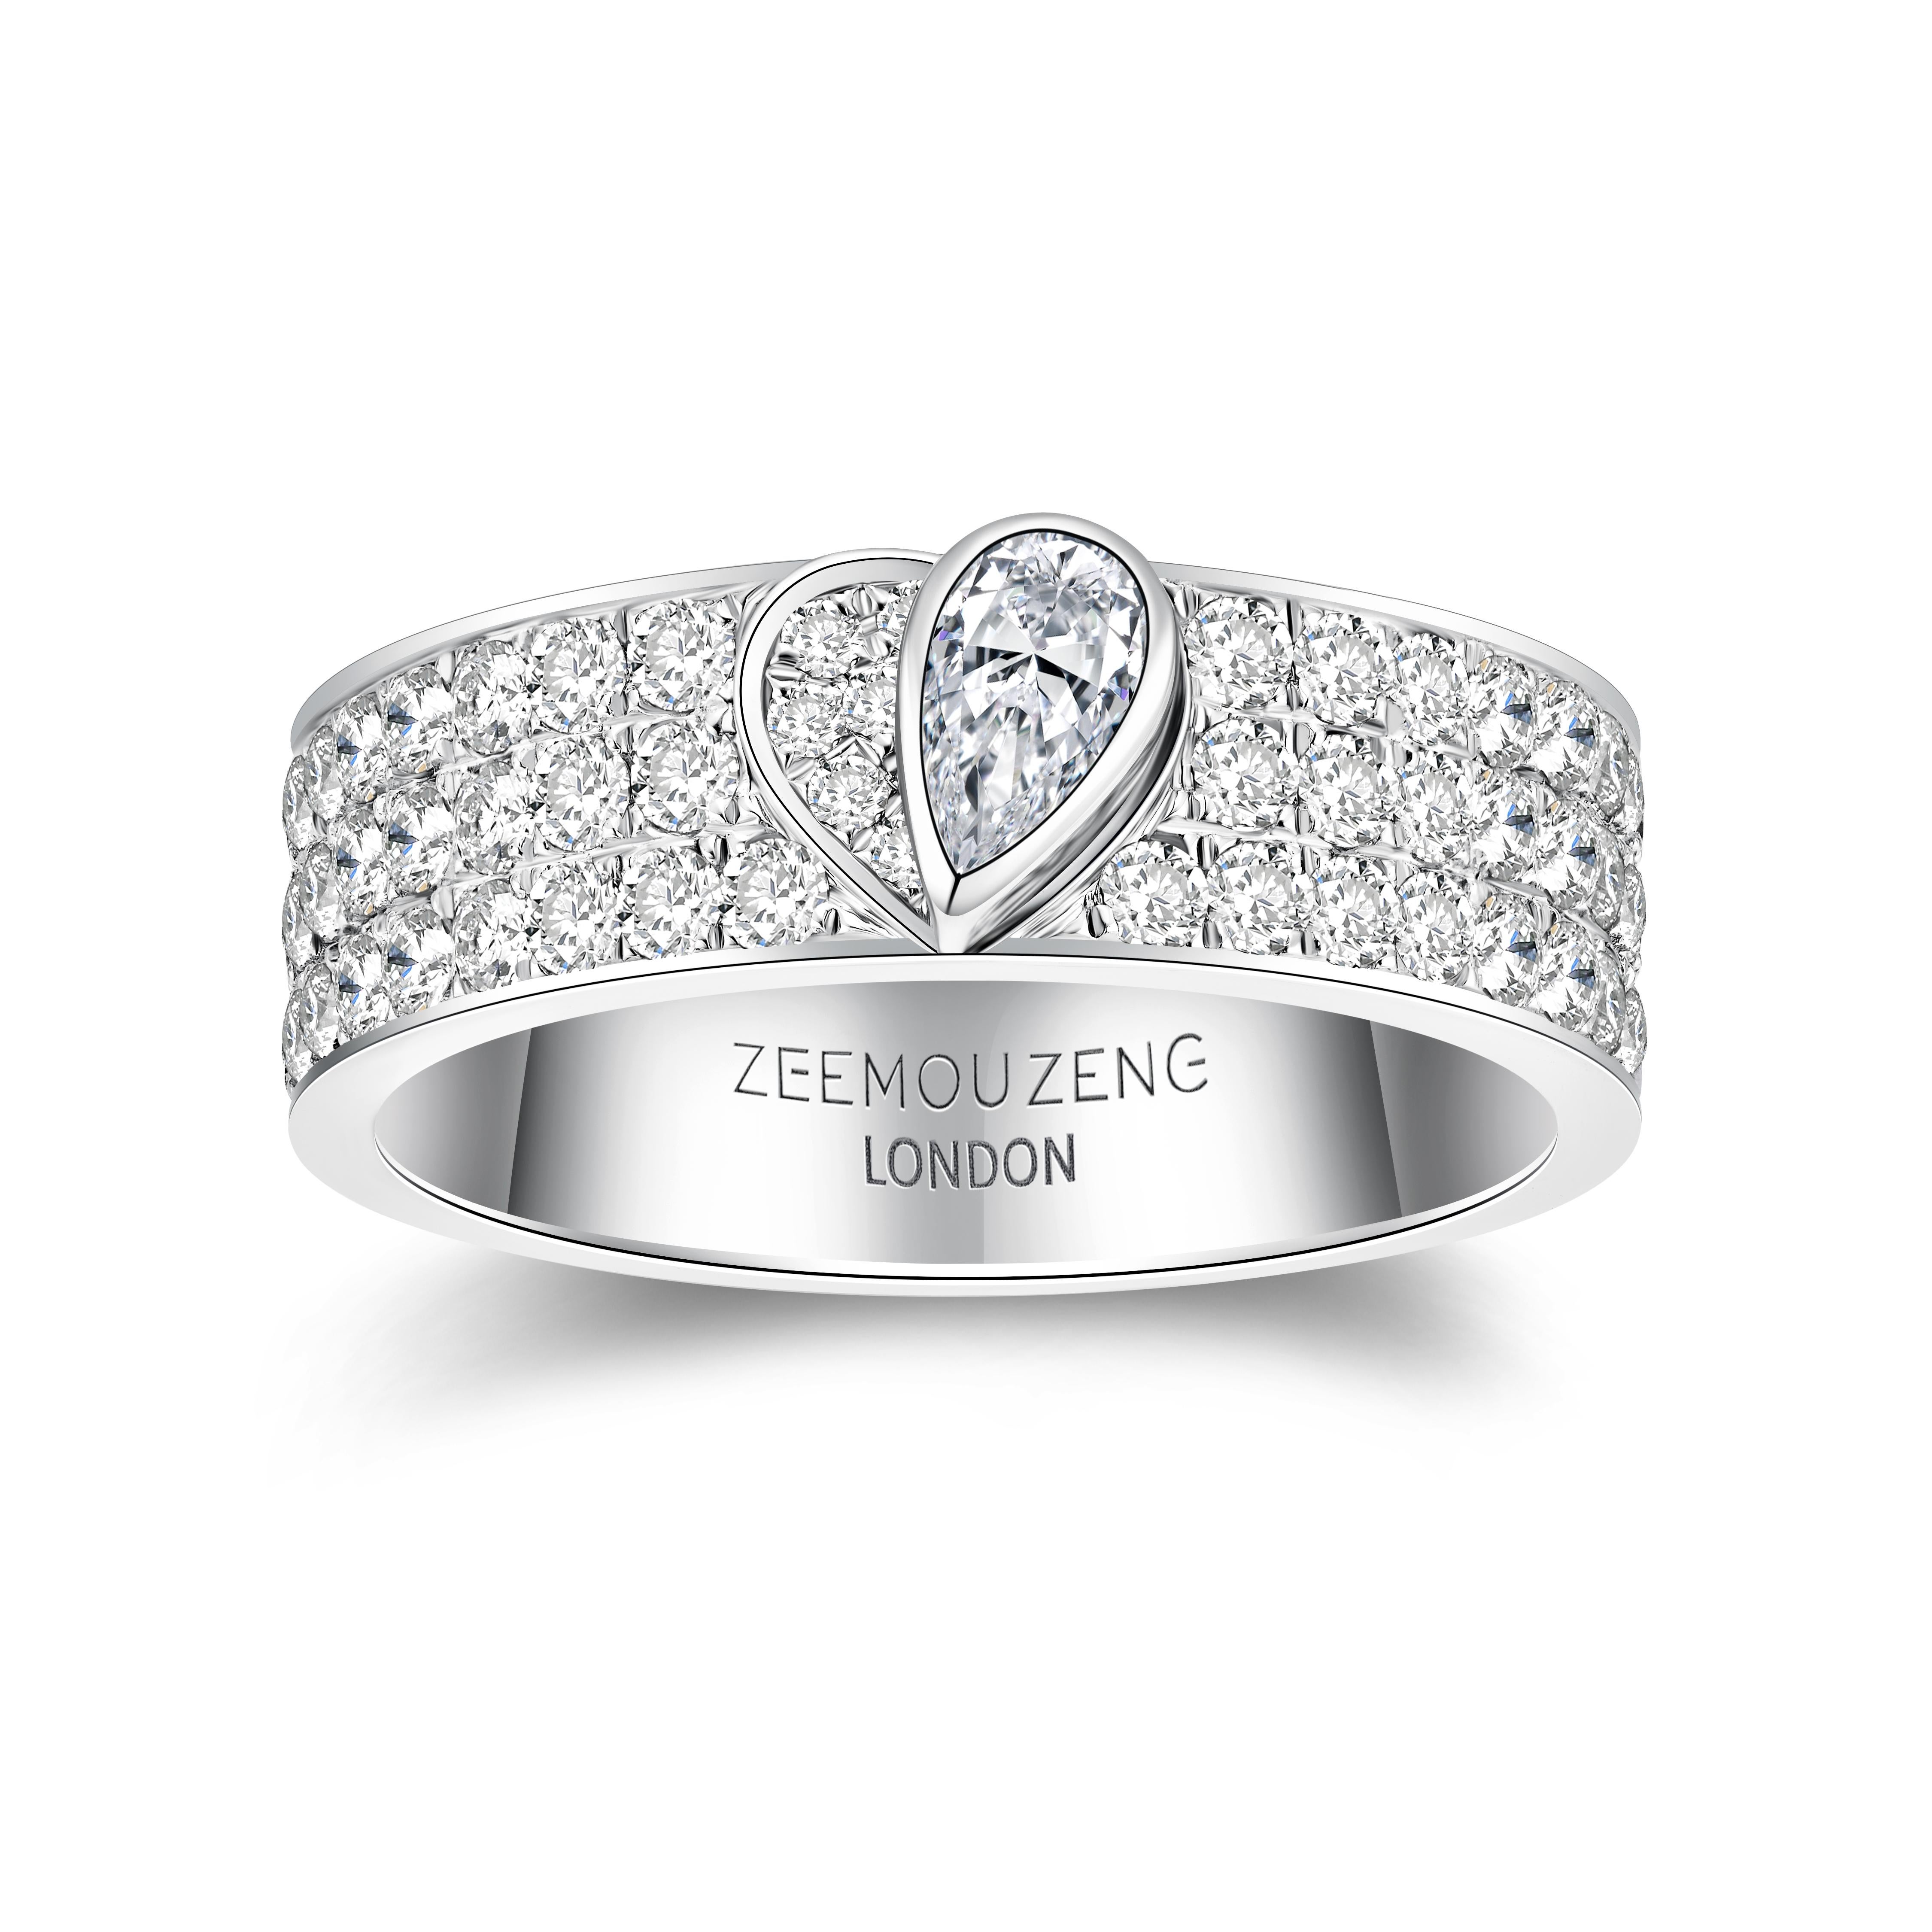 The Heart collection won Bronze Award in the category of Precious Jewellery at the Goldsmiths’ Craft & Design Awards, known as the UK ‘Jewellery Oscars’, 2022.

Heart Collection diamond band in 18k white gold set with pave diamonds, white diamond,